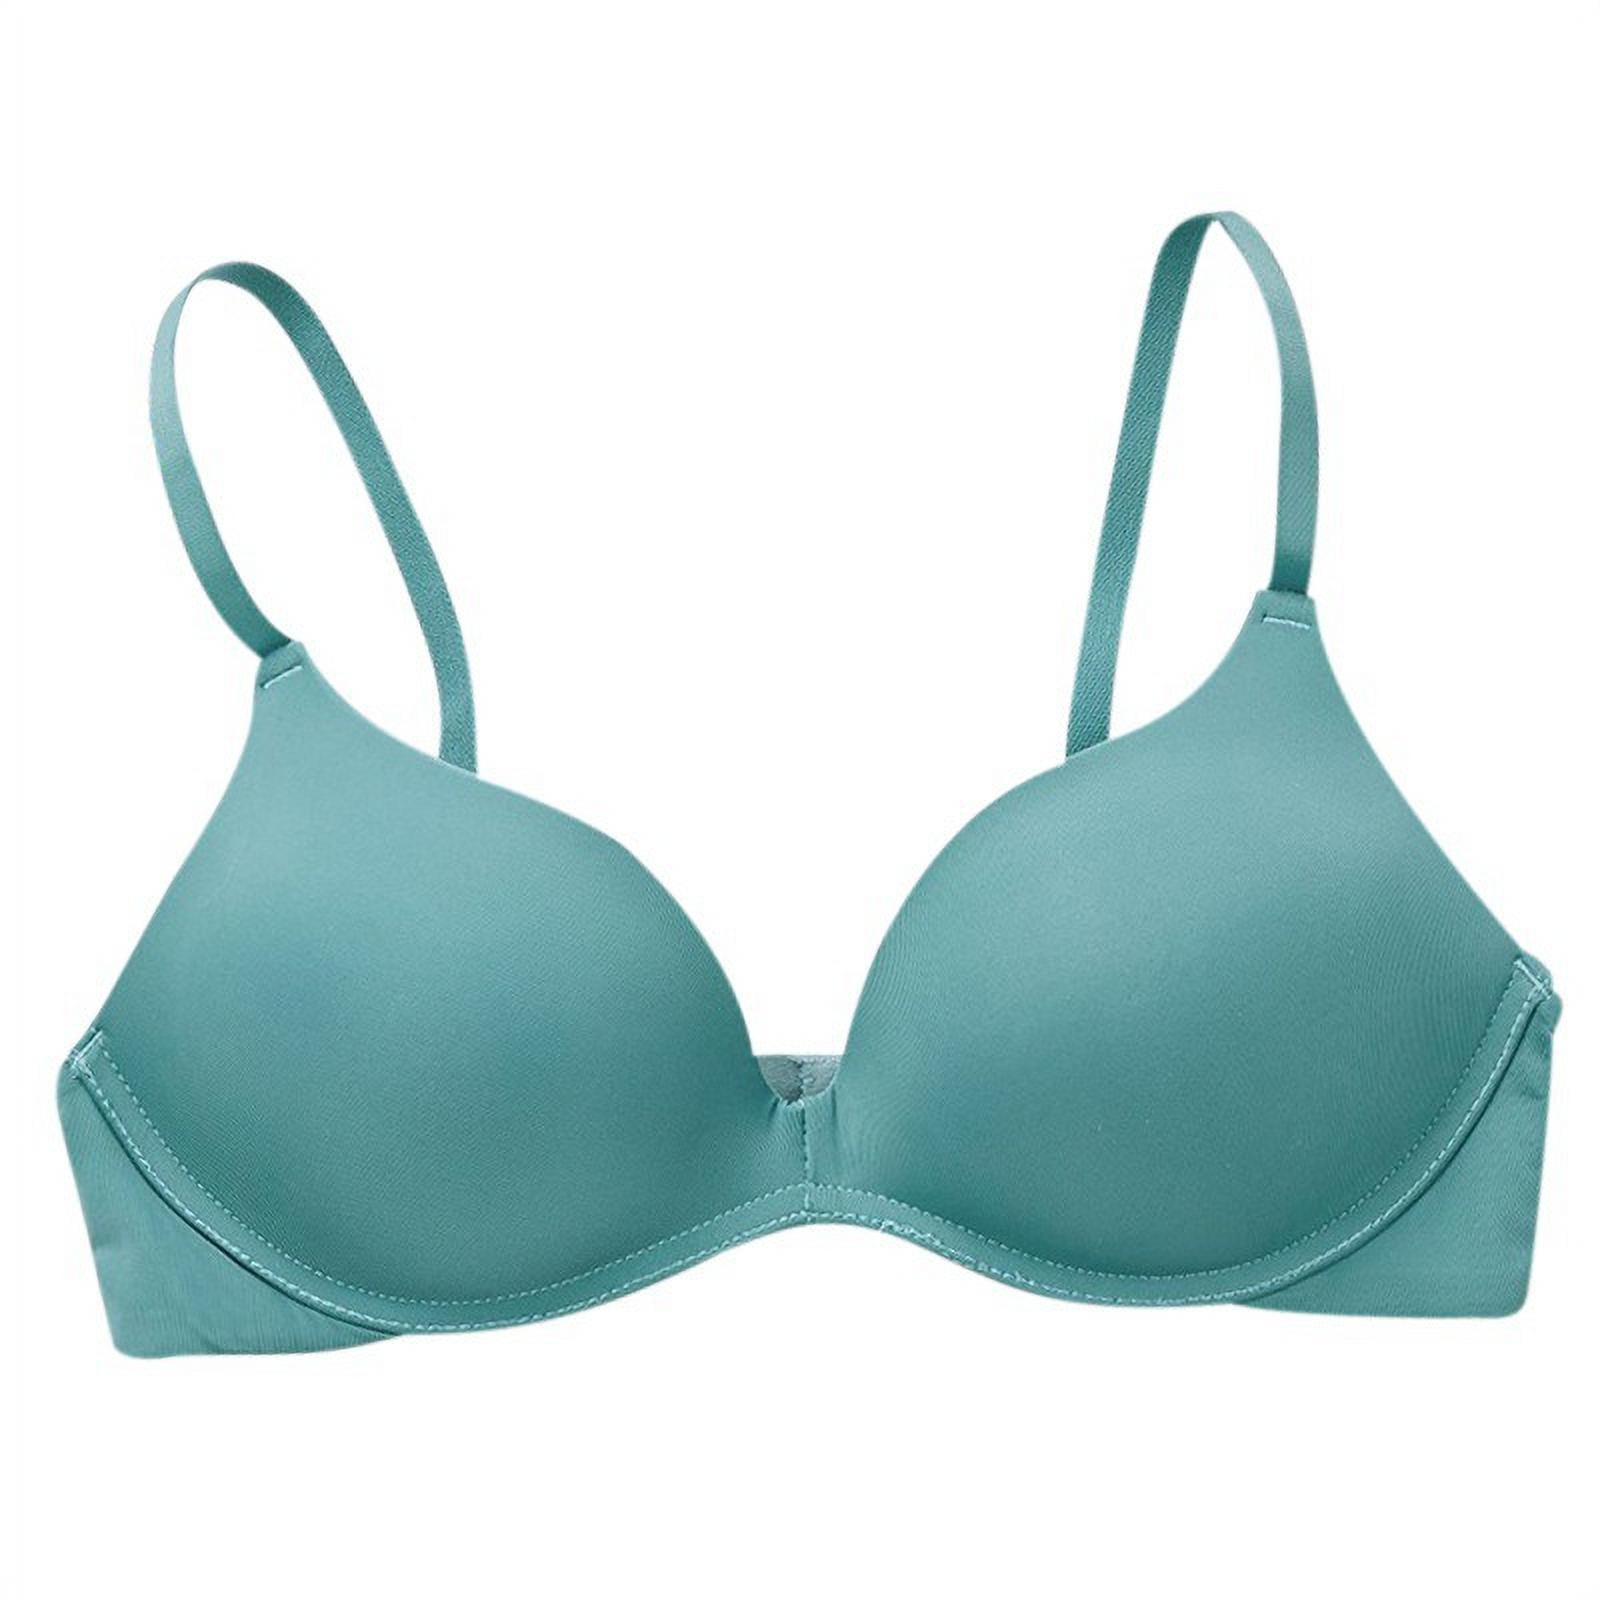 Aerie Wireless Lightly Padded Blue Bra Size 32A - $10 - From Kimberly